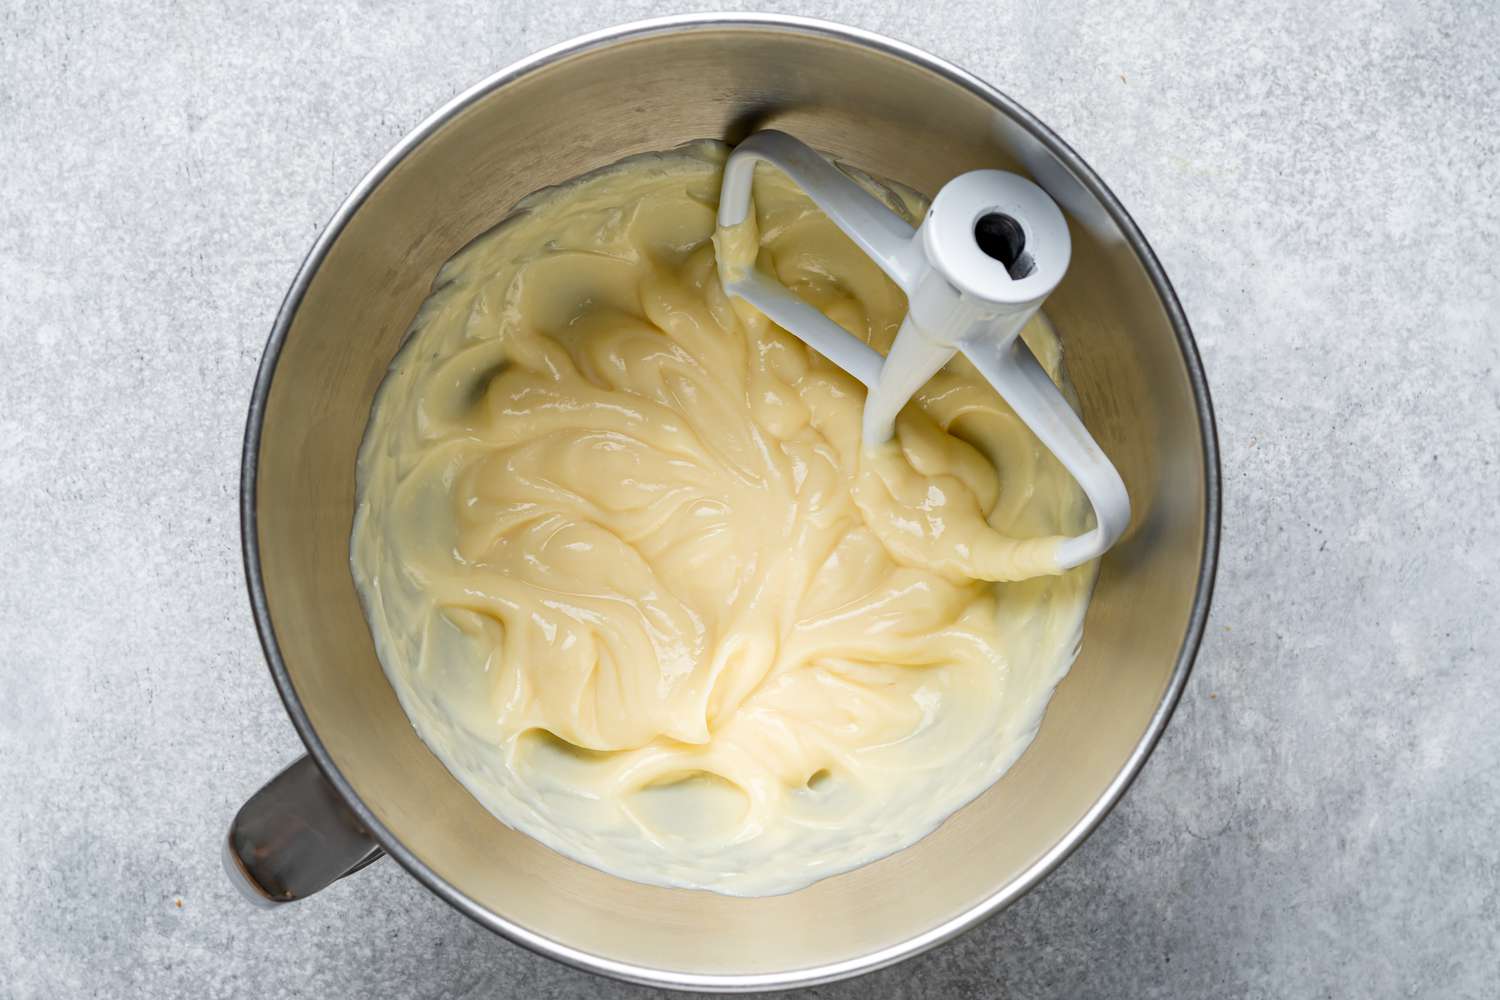 Chilled pastry cream in the bowl of a stand mixer